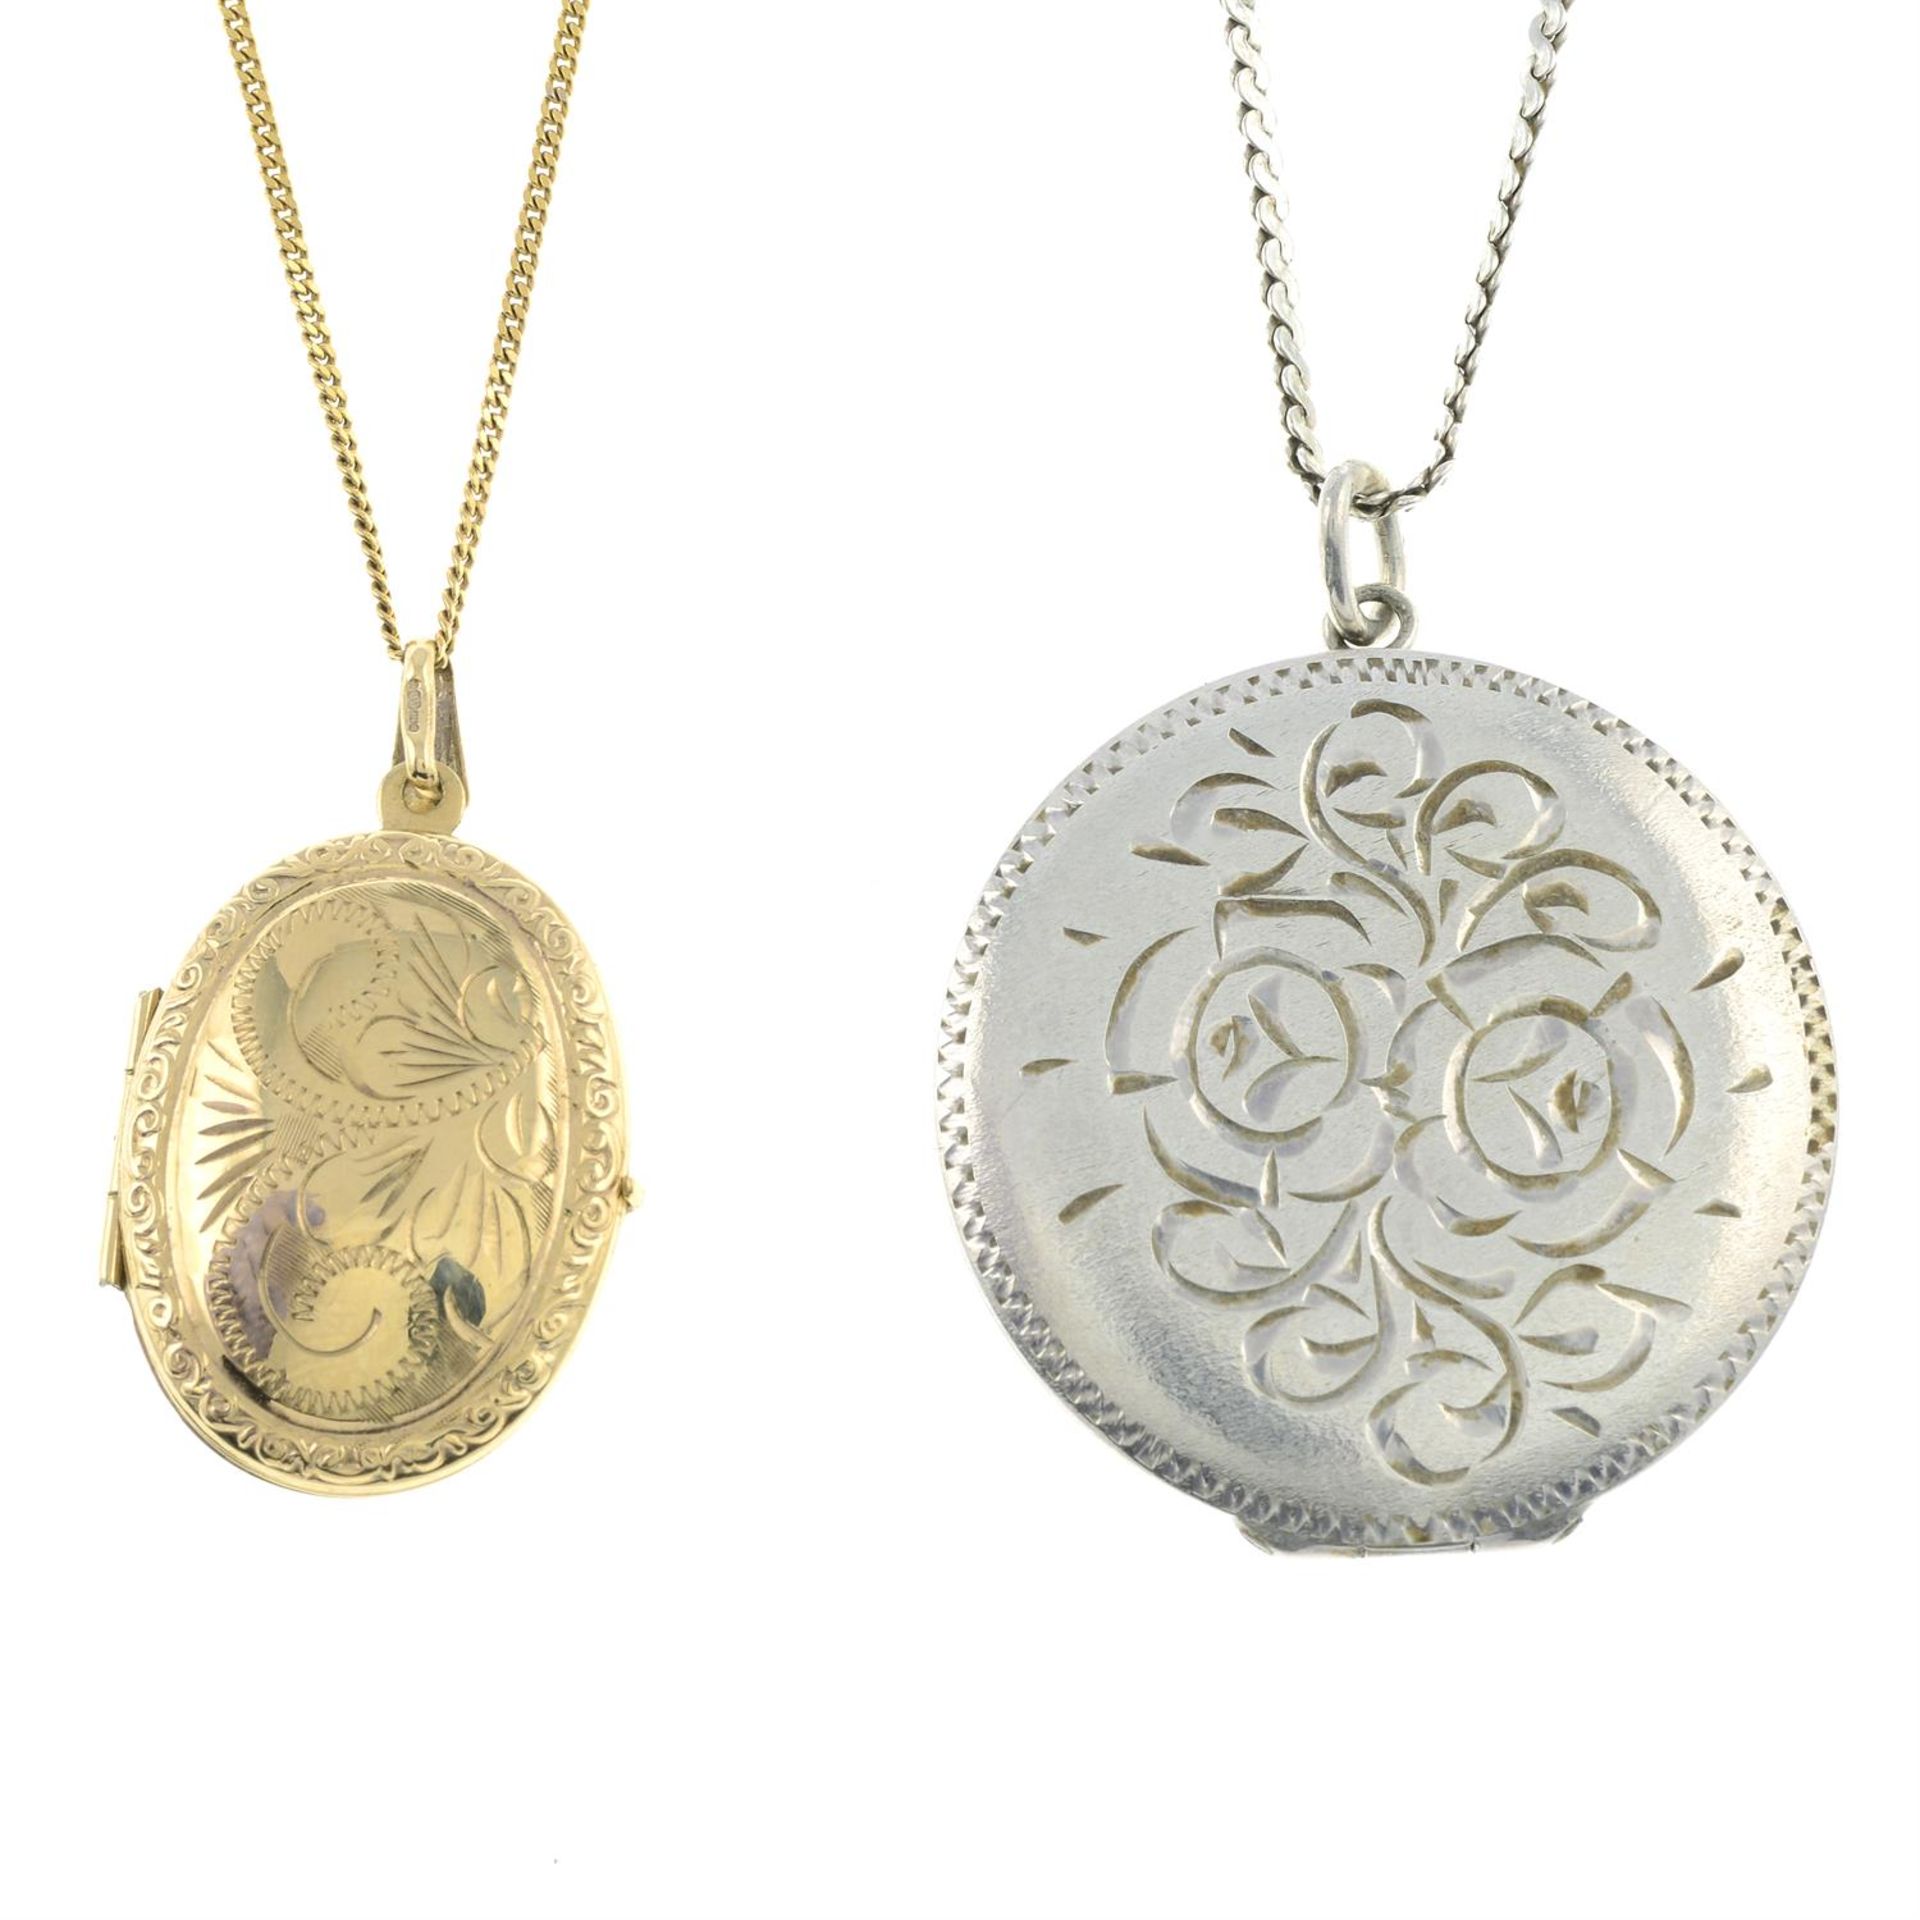 Two lockets with chains.